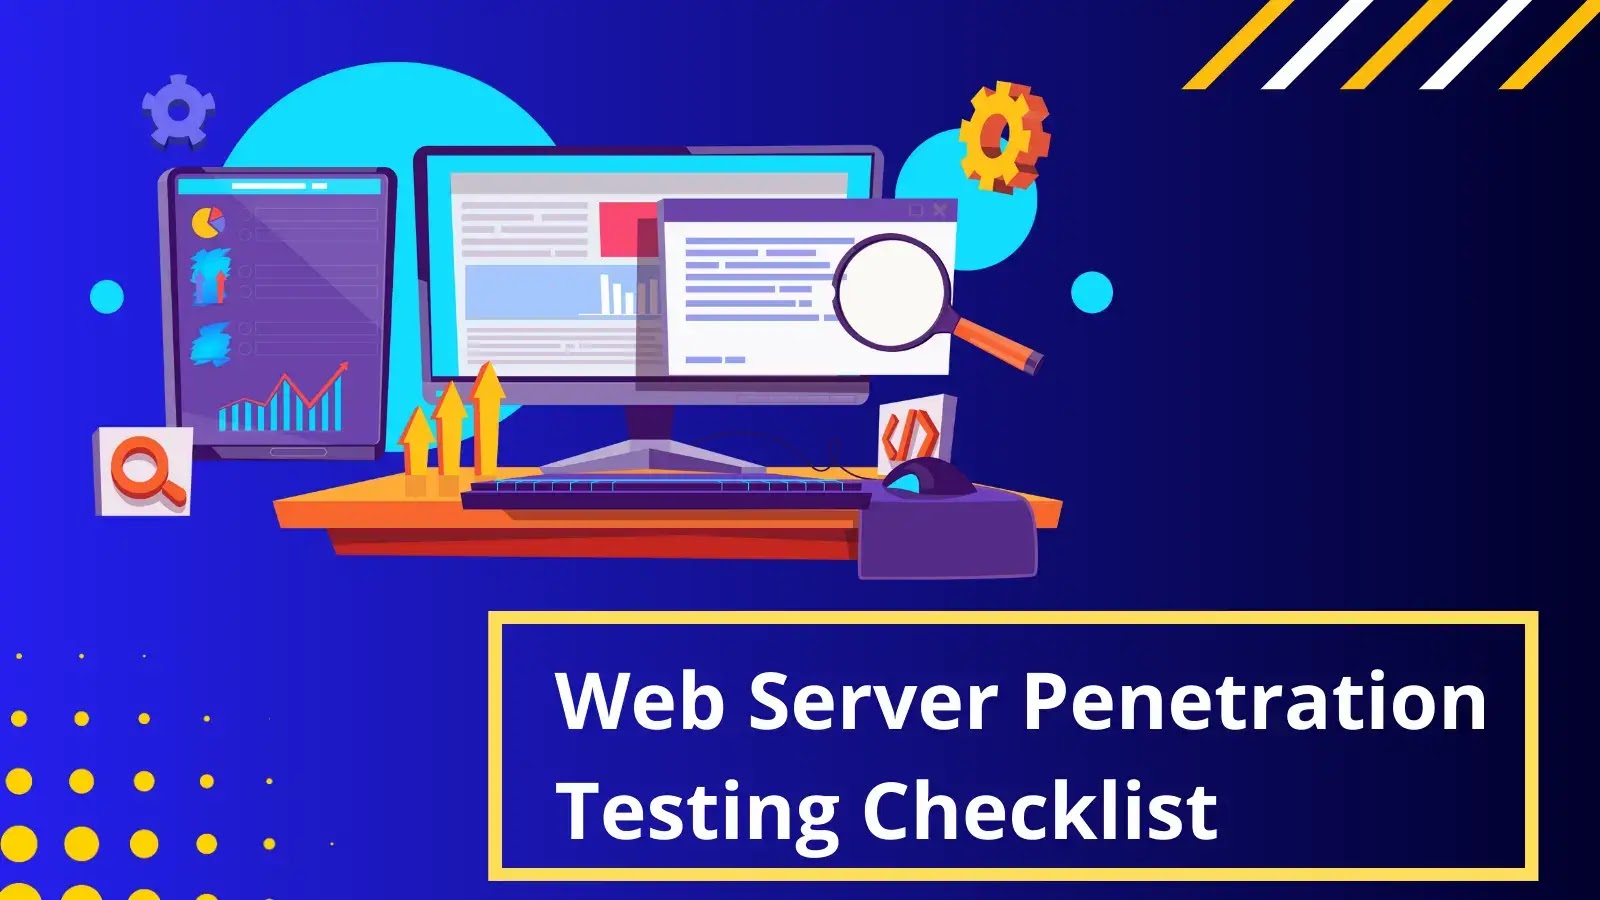 The Complete Checklist to Web App Pentest - Blog by CyberNX